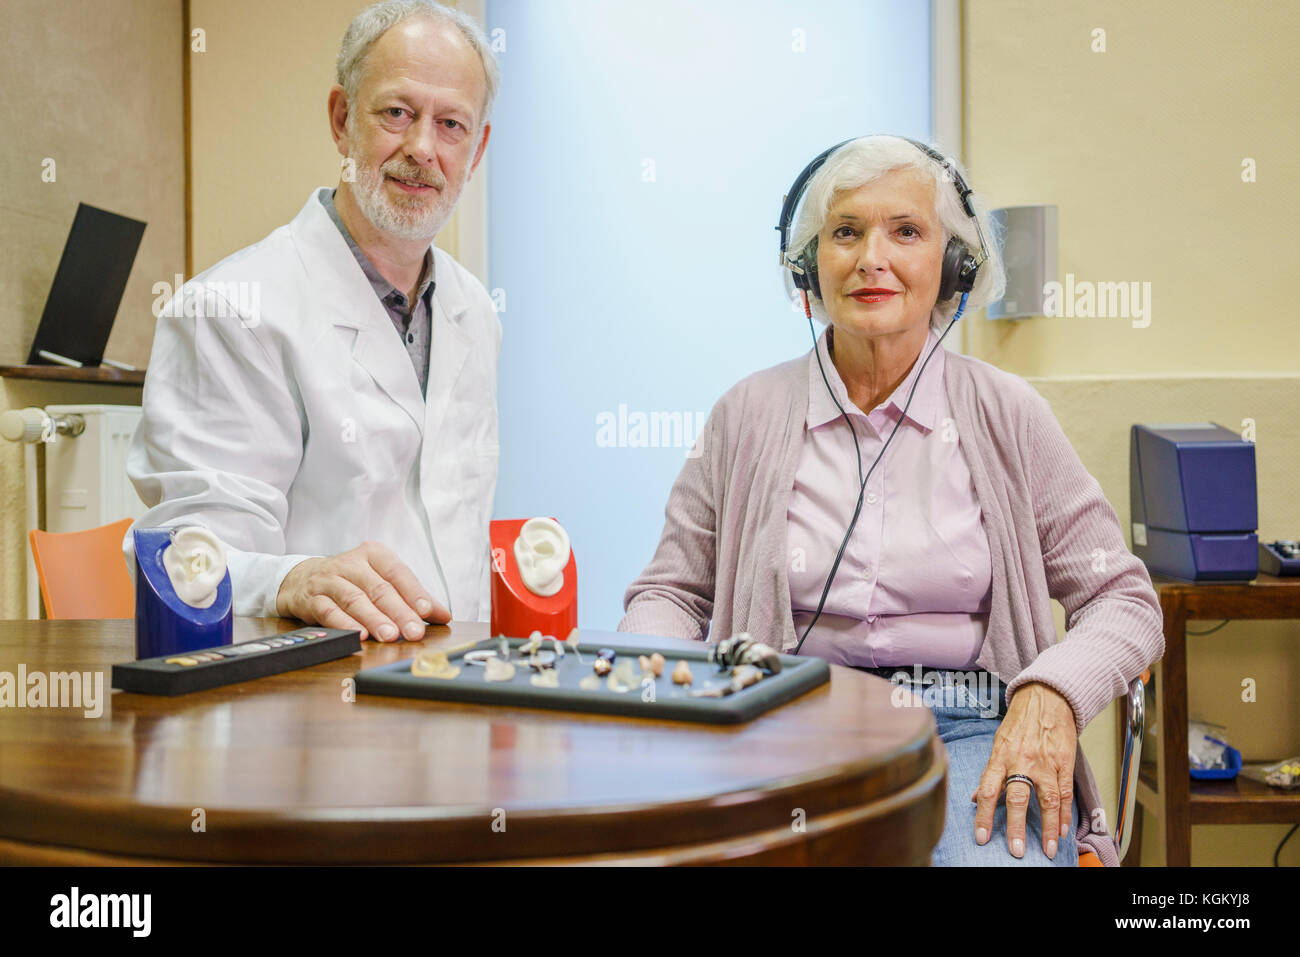 Portrait of audiologist and senior patient wearing headphones during ear exam at clinic Stock Photo